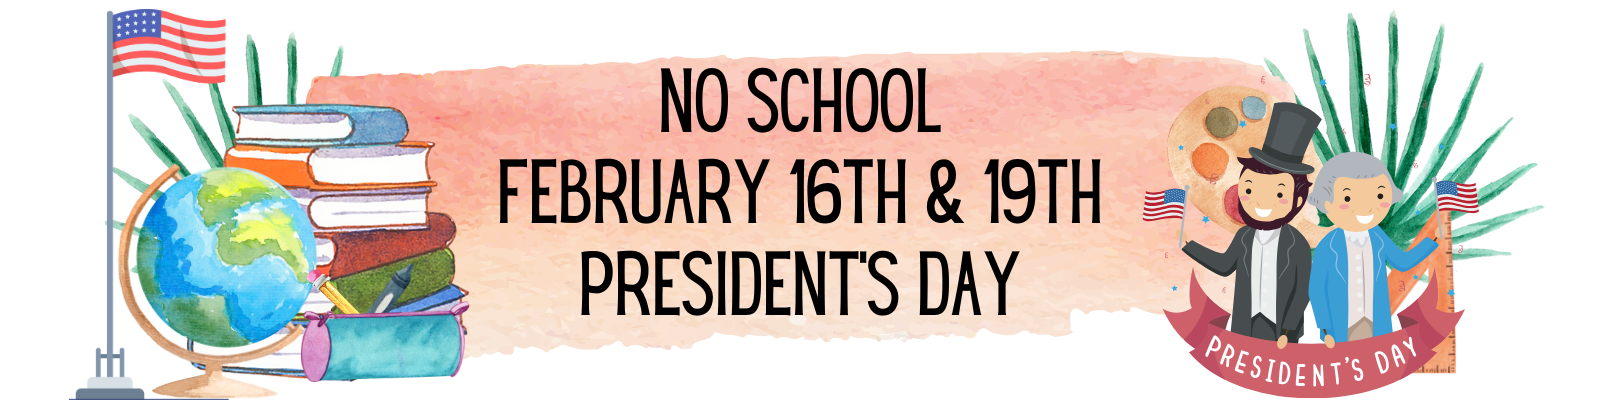 No School February 16th and 19th, President's Day